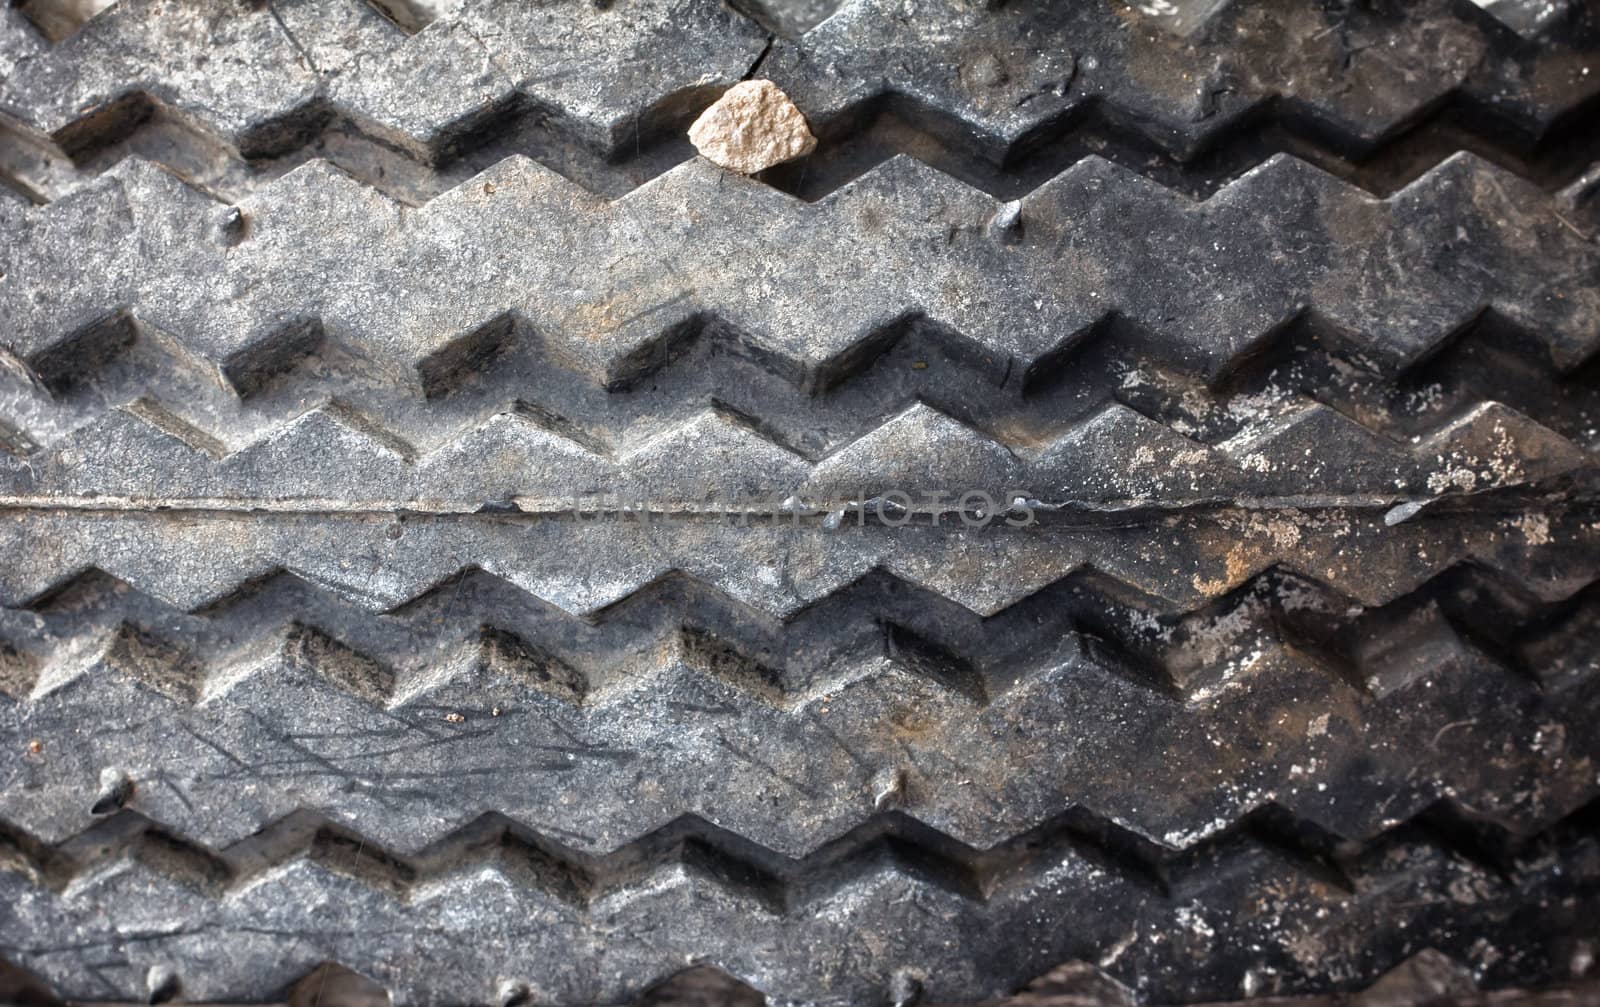 A worn bias ply tire with signs of age.